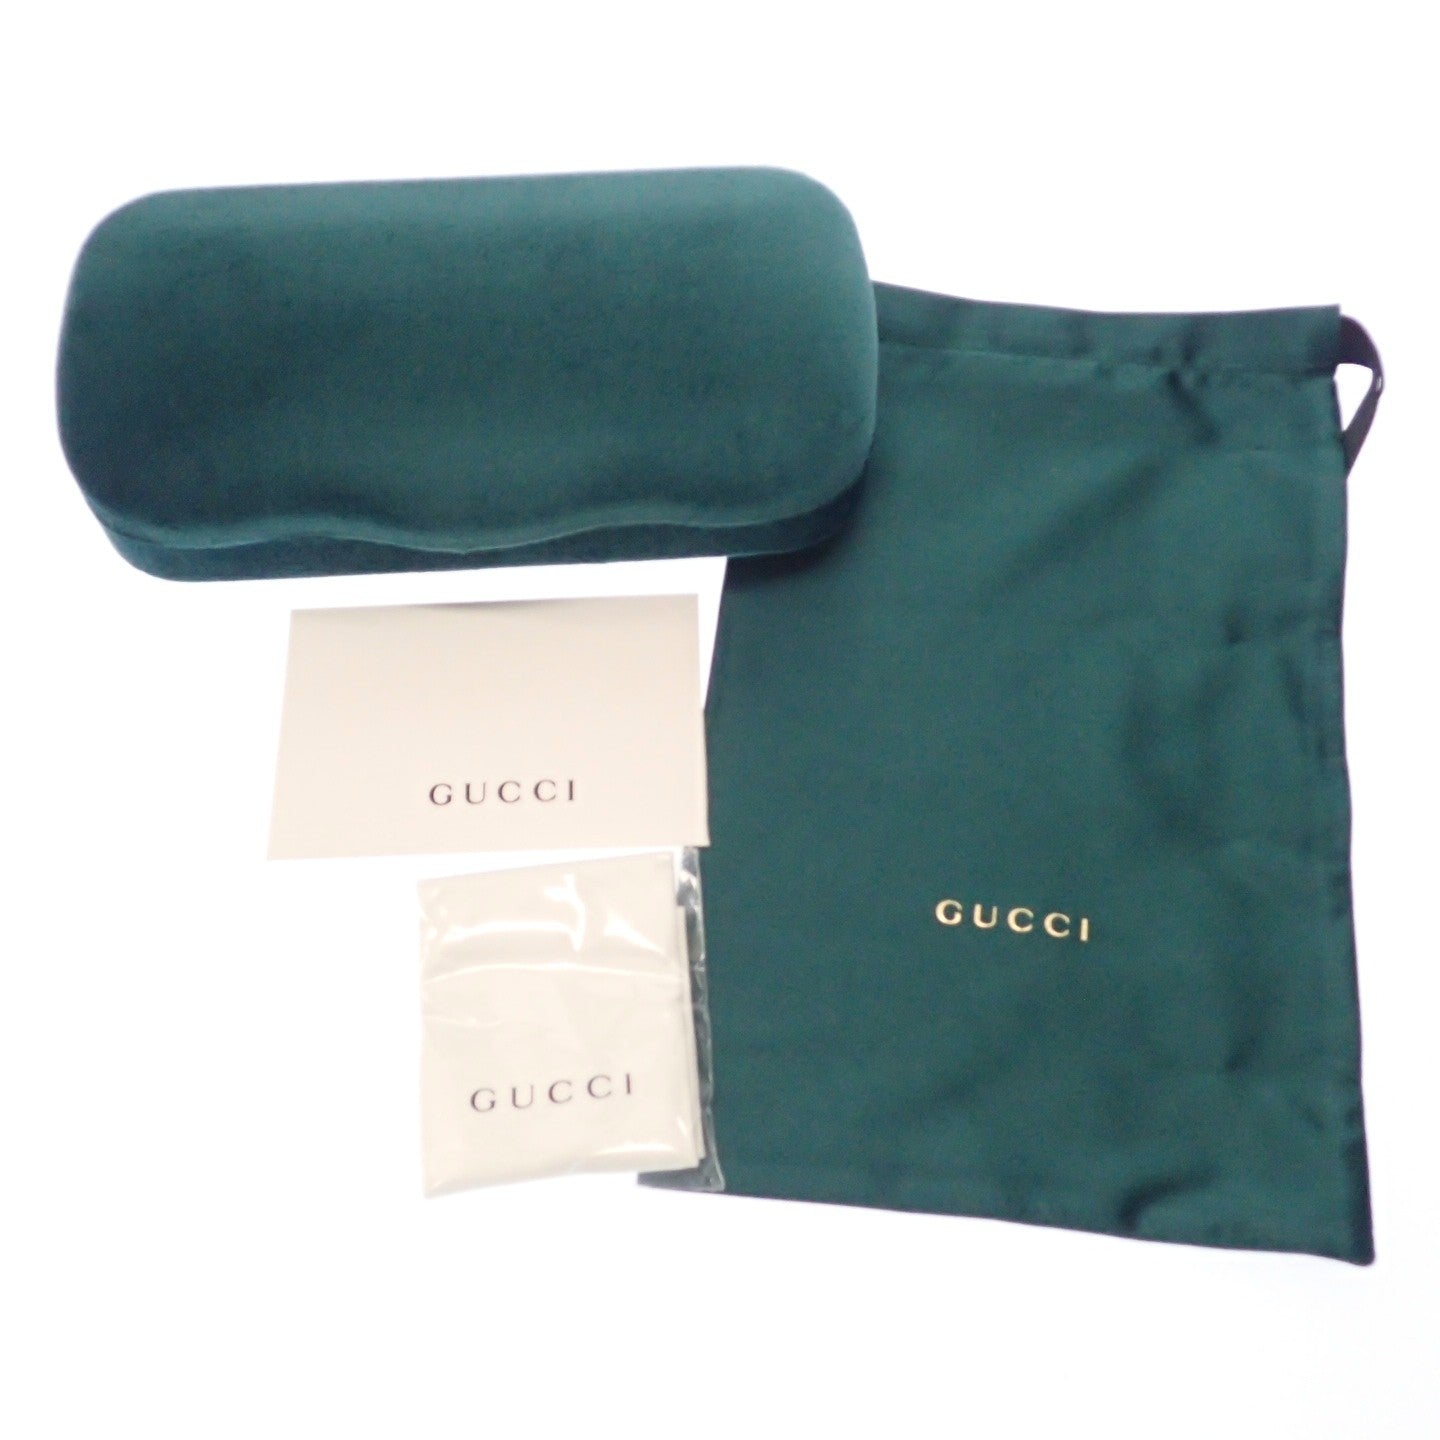 Unused ◆ Gucci Date Glasses Clear Lens 54□18-145 GG0474O Black With Case Ladies GUCCI [AFI14] 